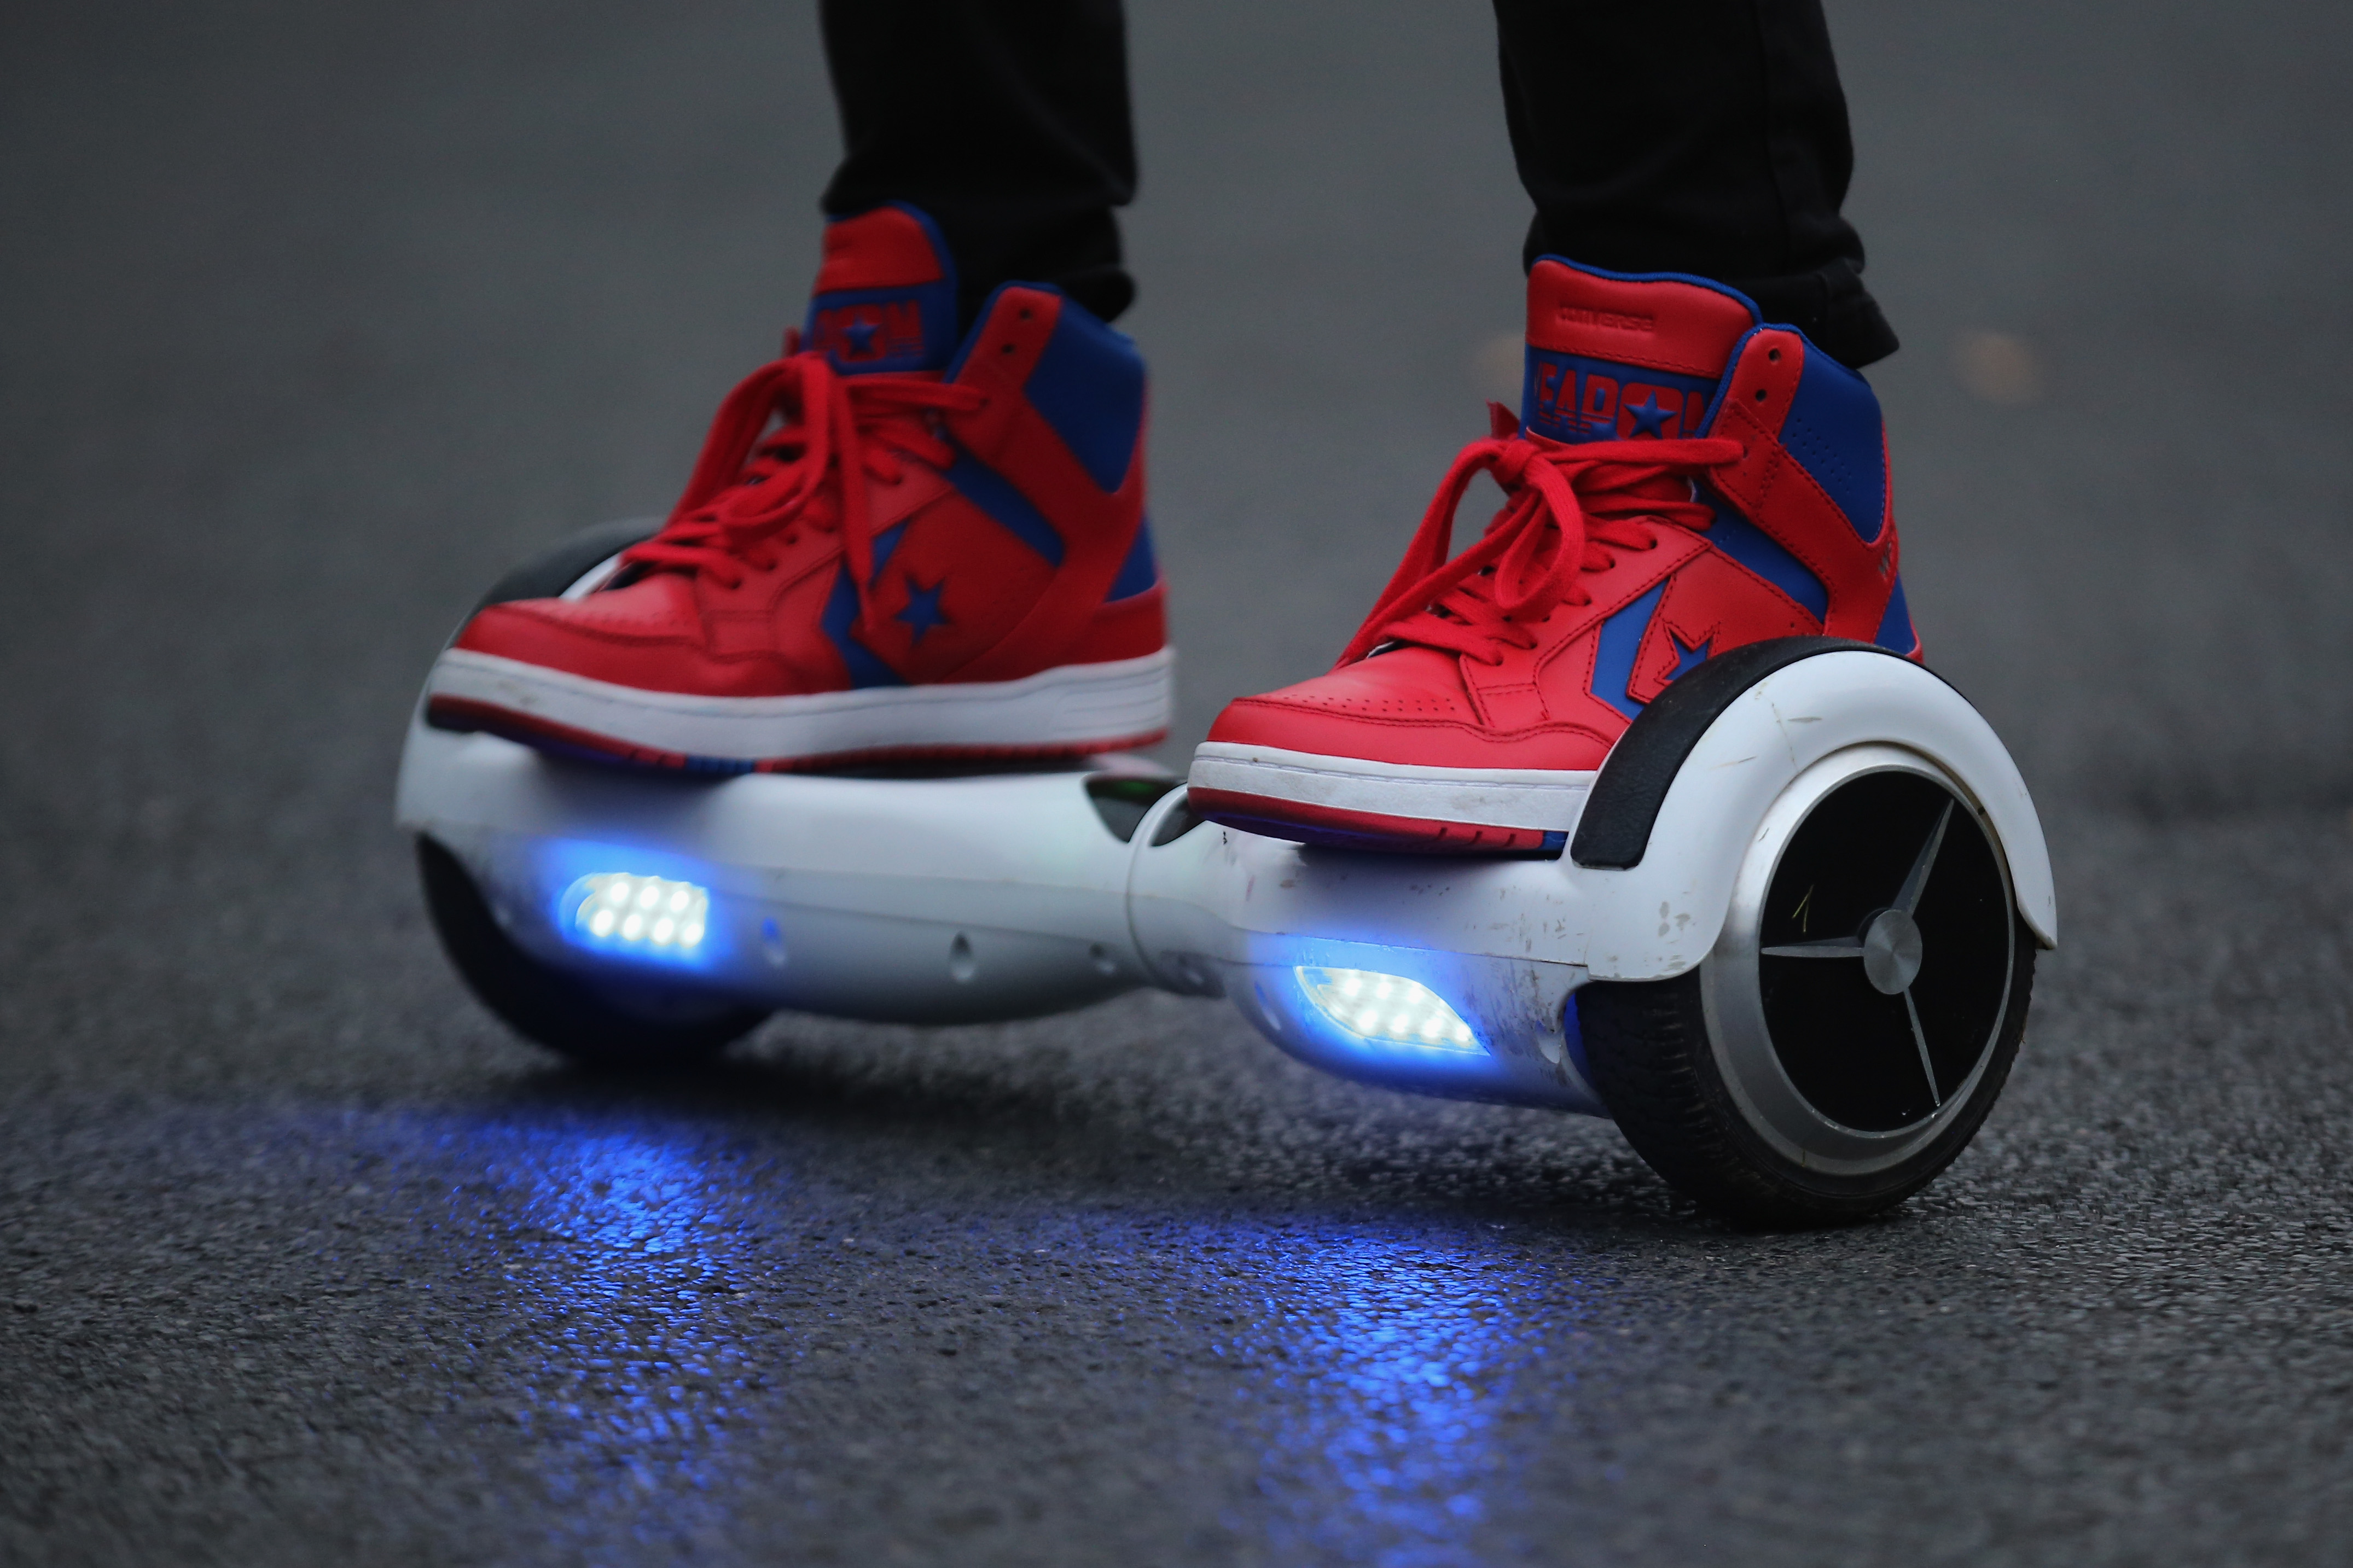 Hoverboards Hoverboards Everything You Need To Know Pictures Cbs News 